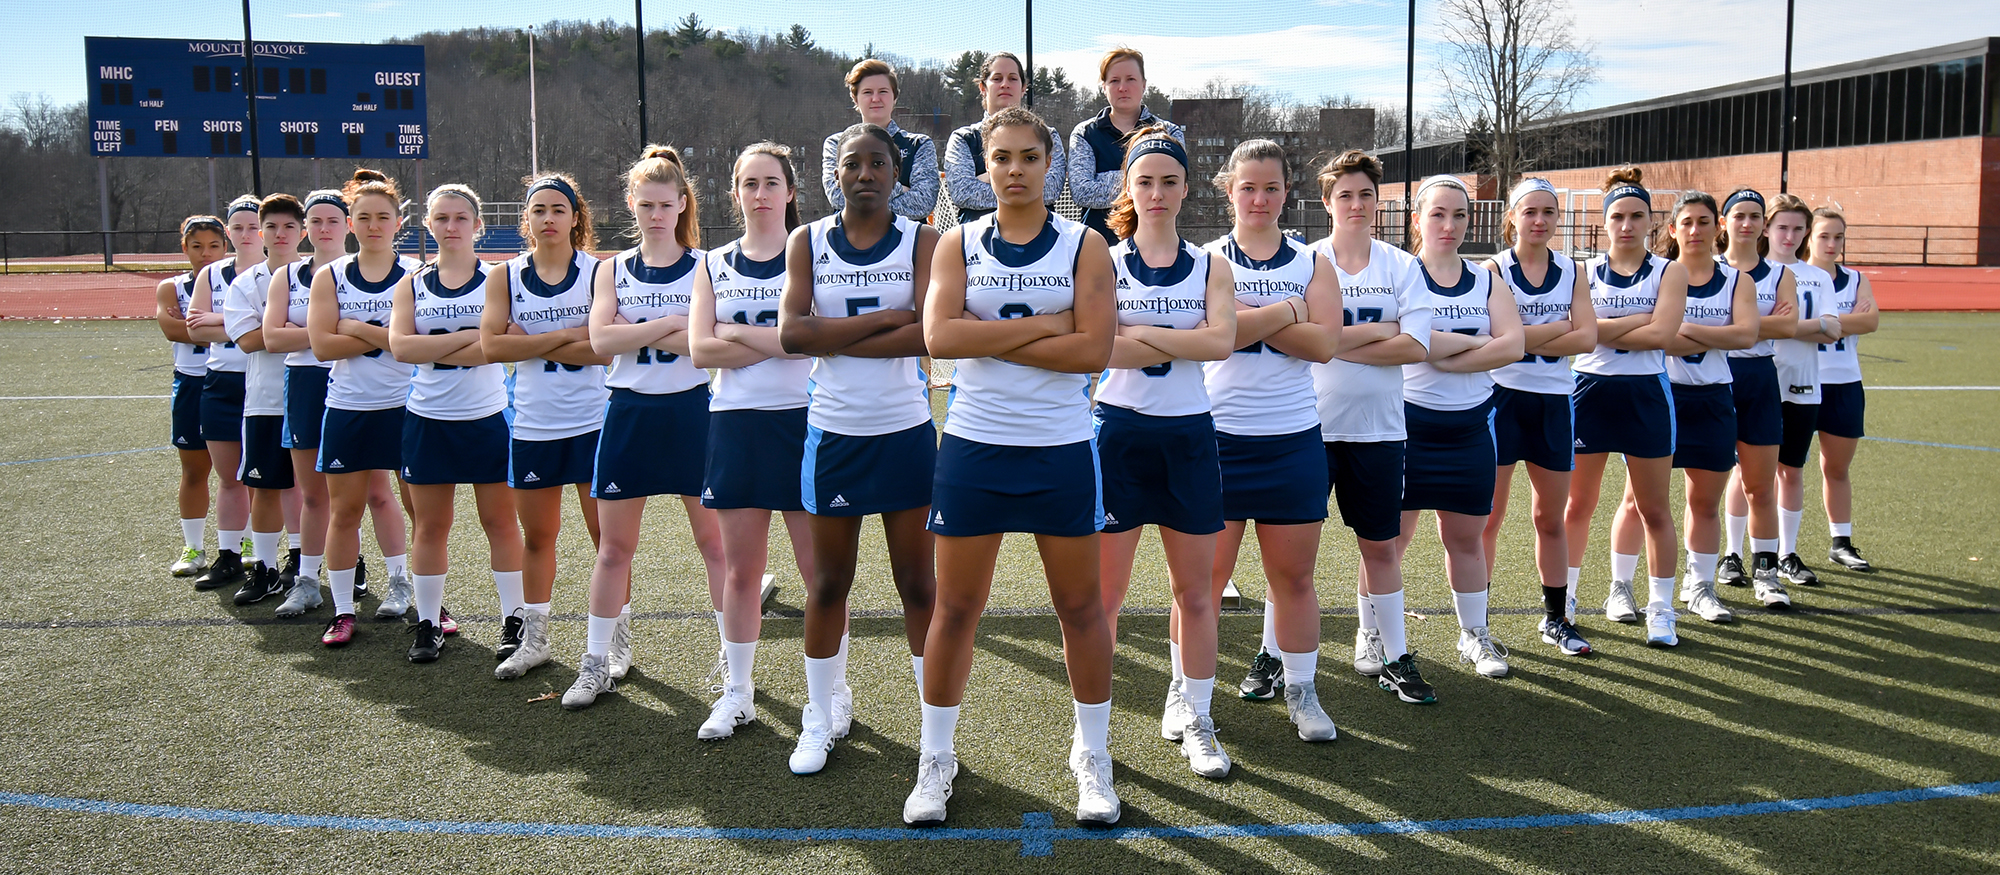 Photo of the 2018 Mount Holyoke College Lacrosse Team.